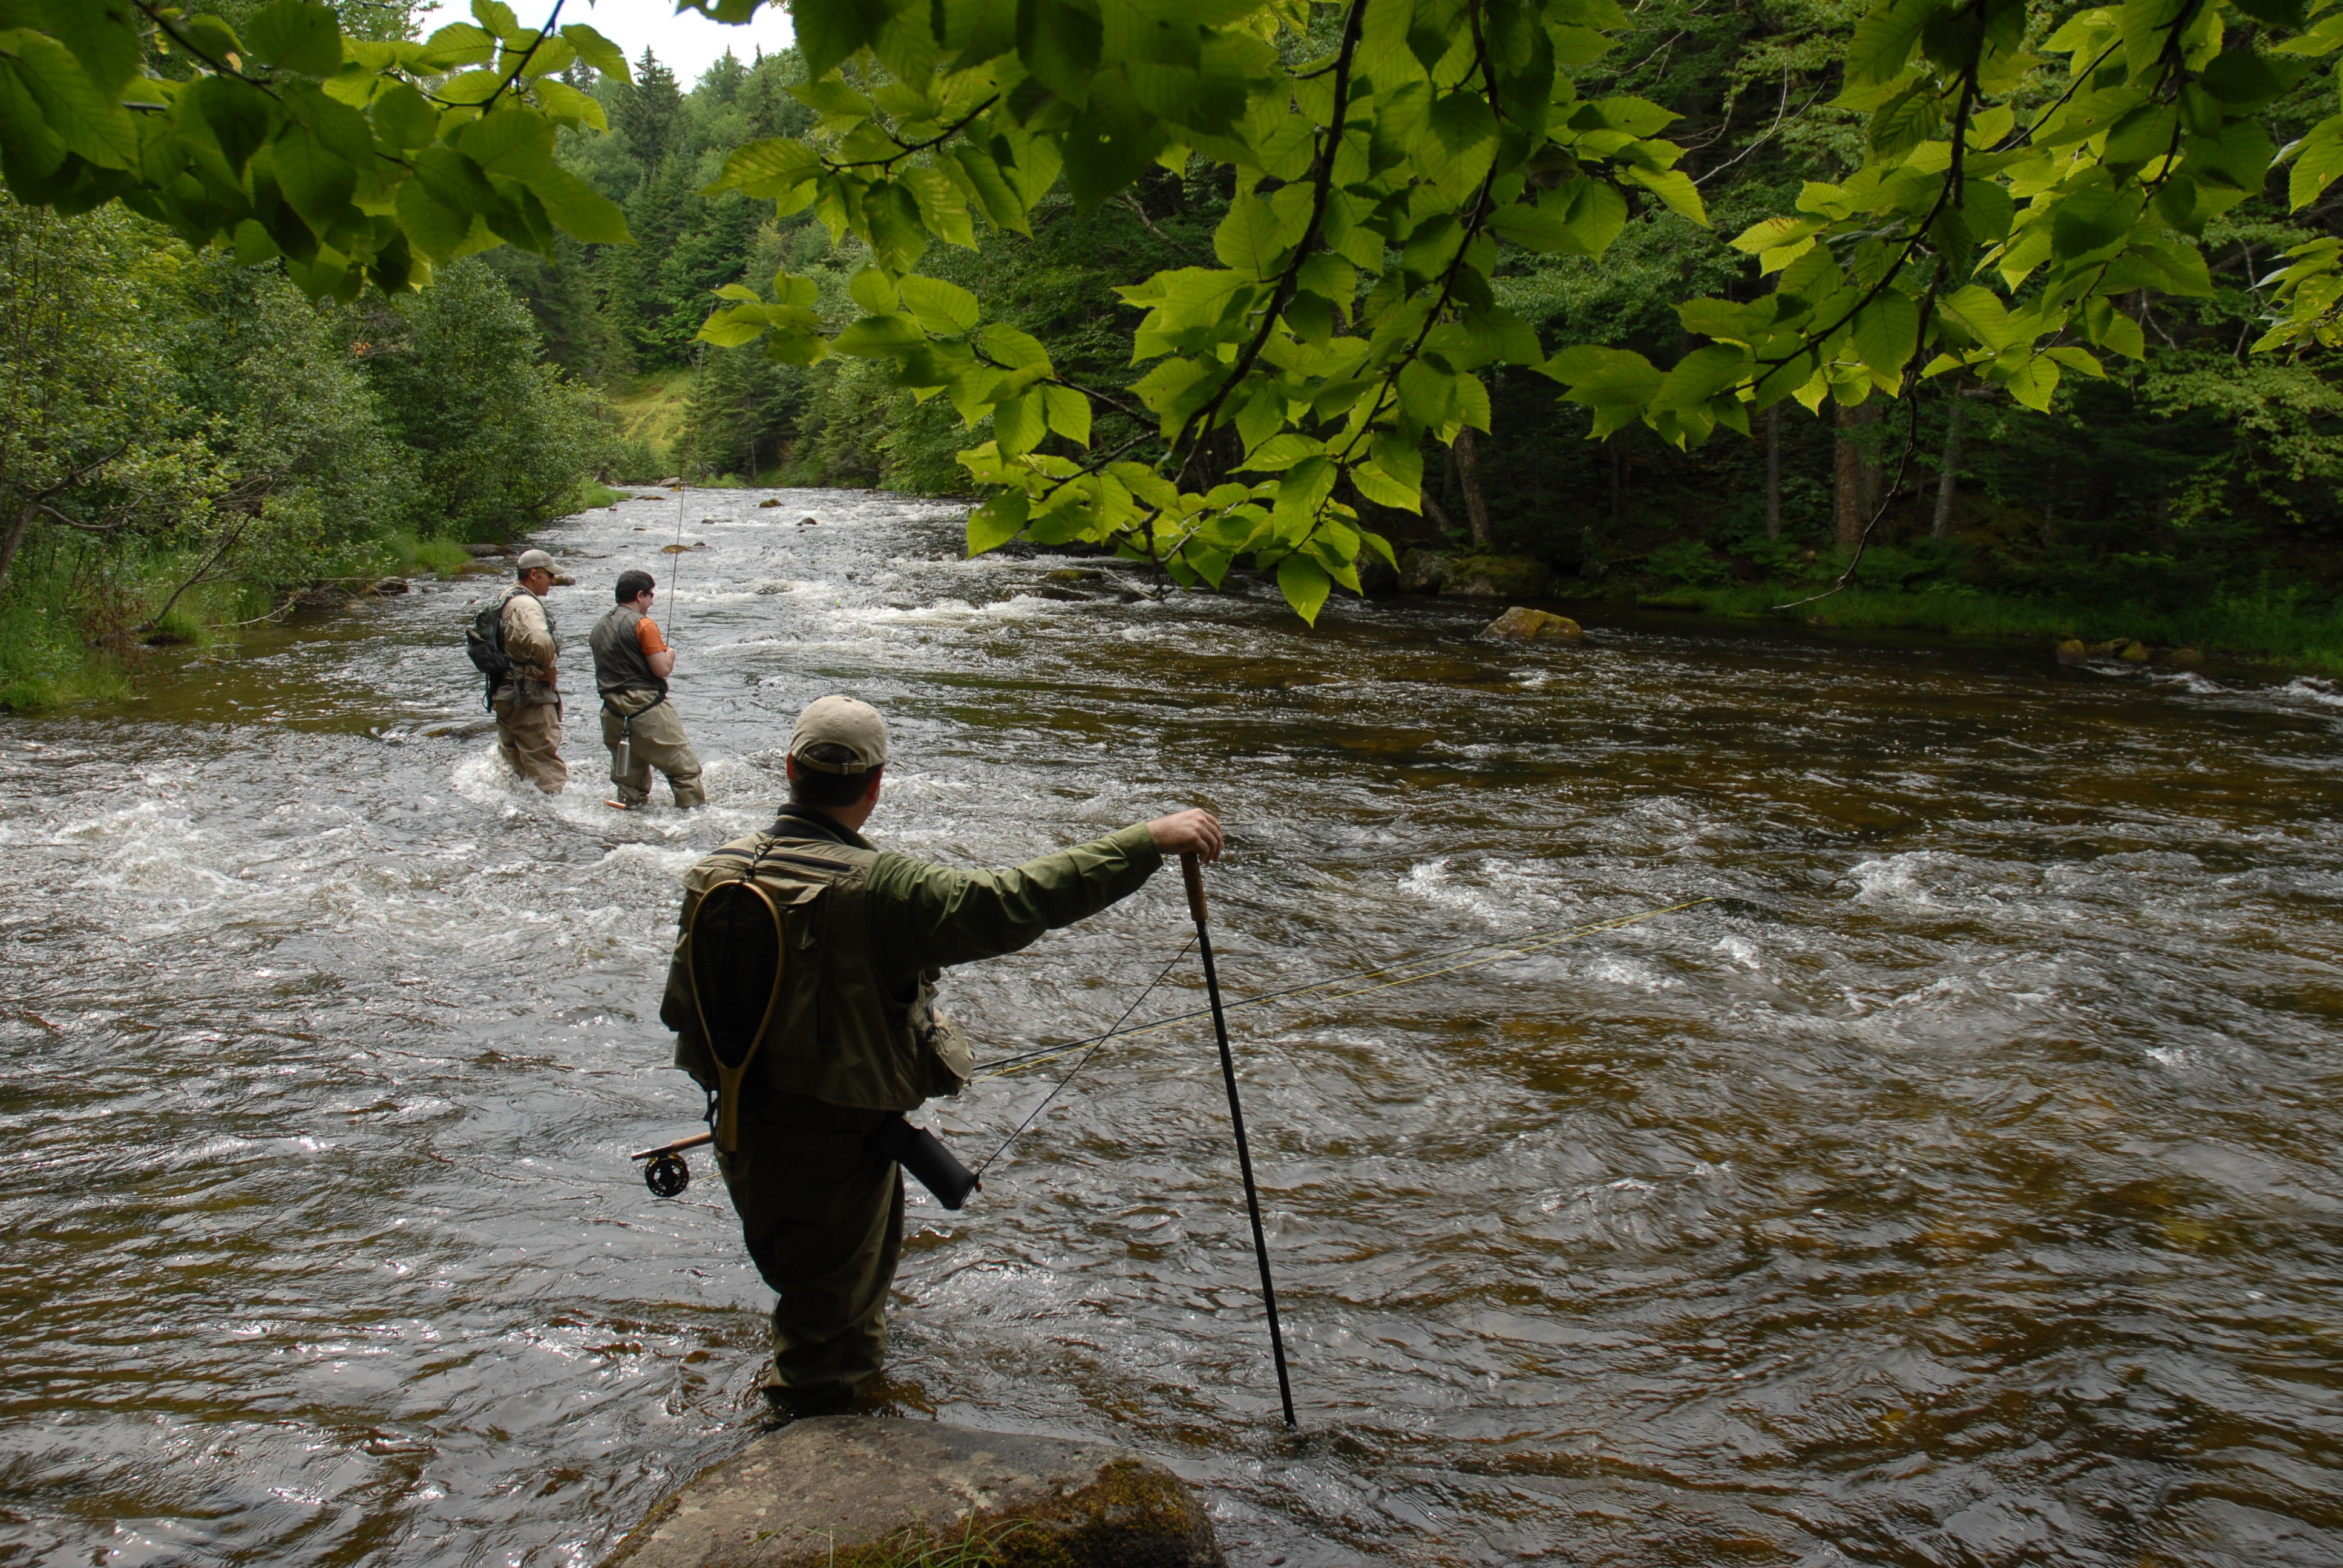 Lopstick Lodge And Cabins: Guided Fishing on the Upper COnnecticut RIver